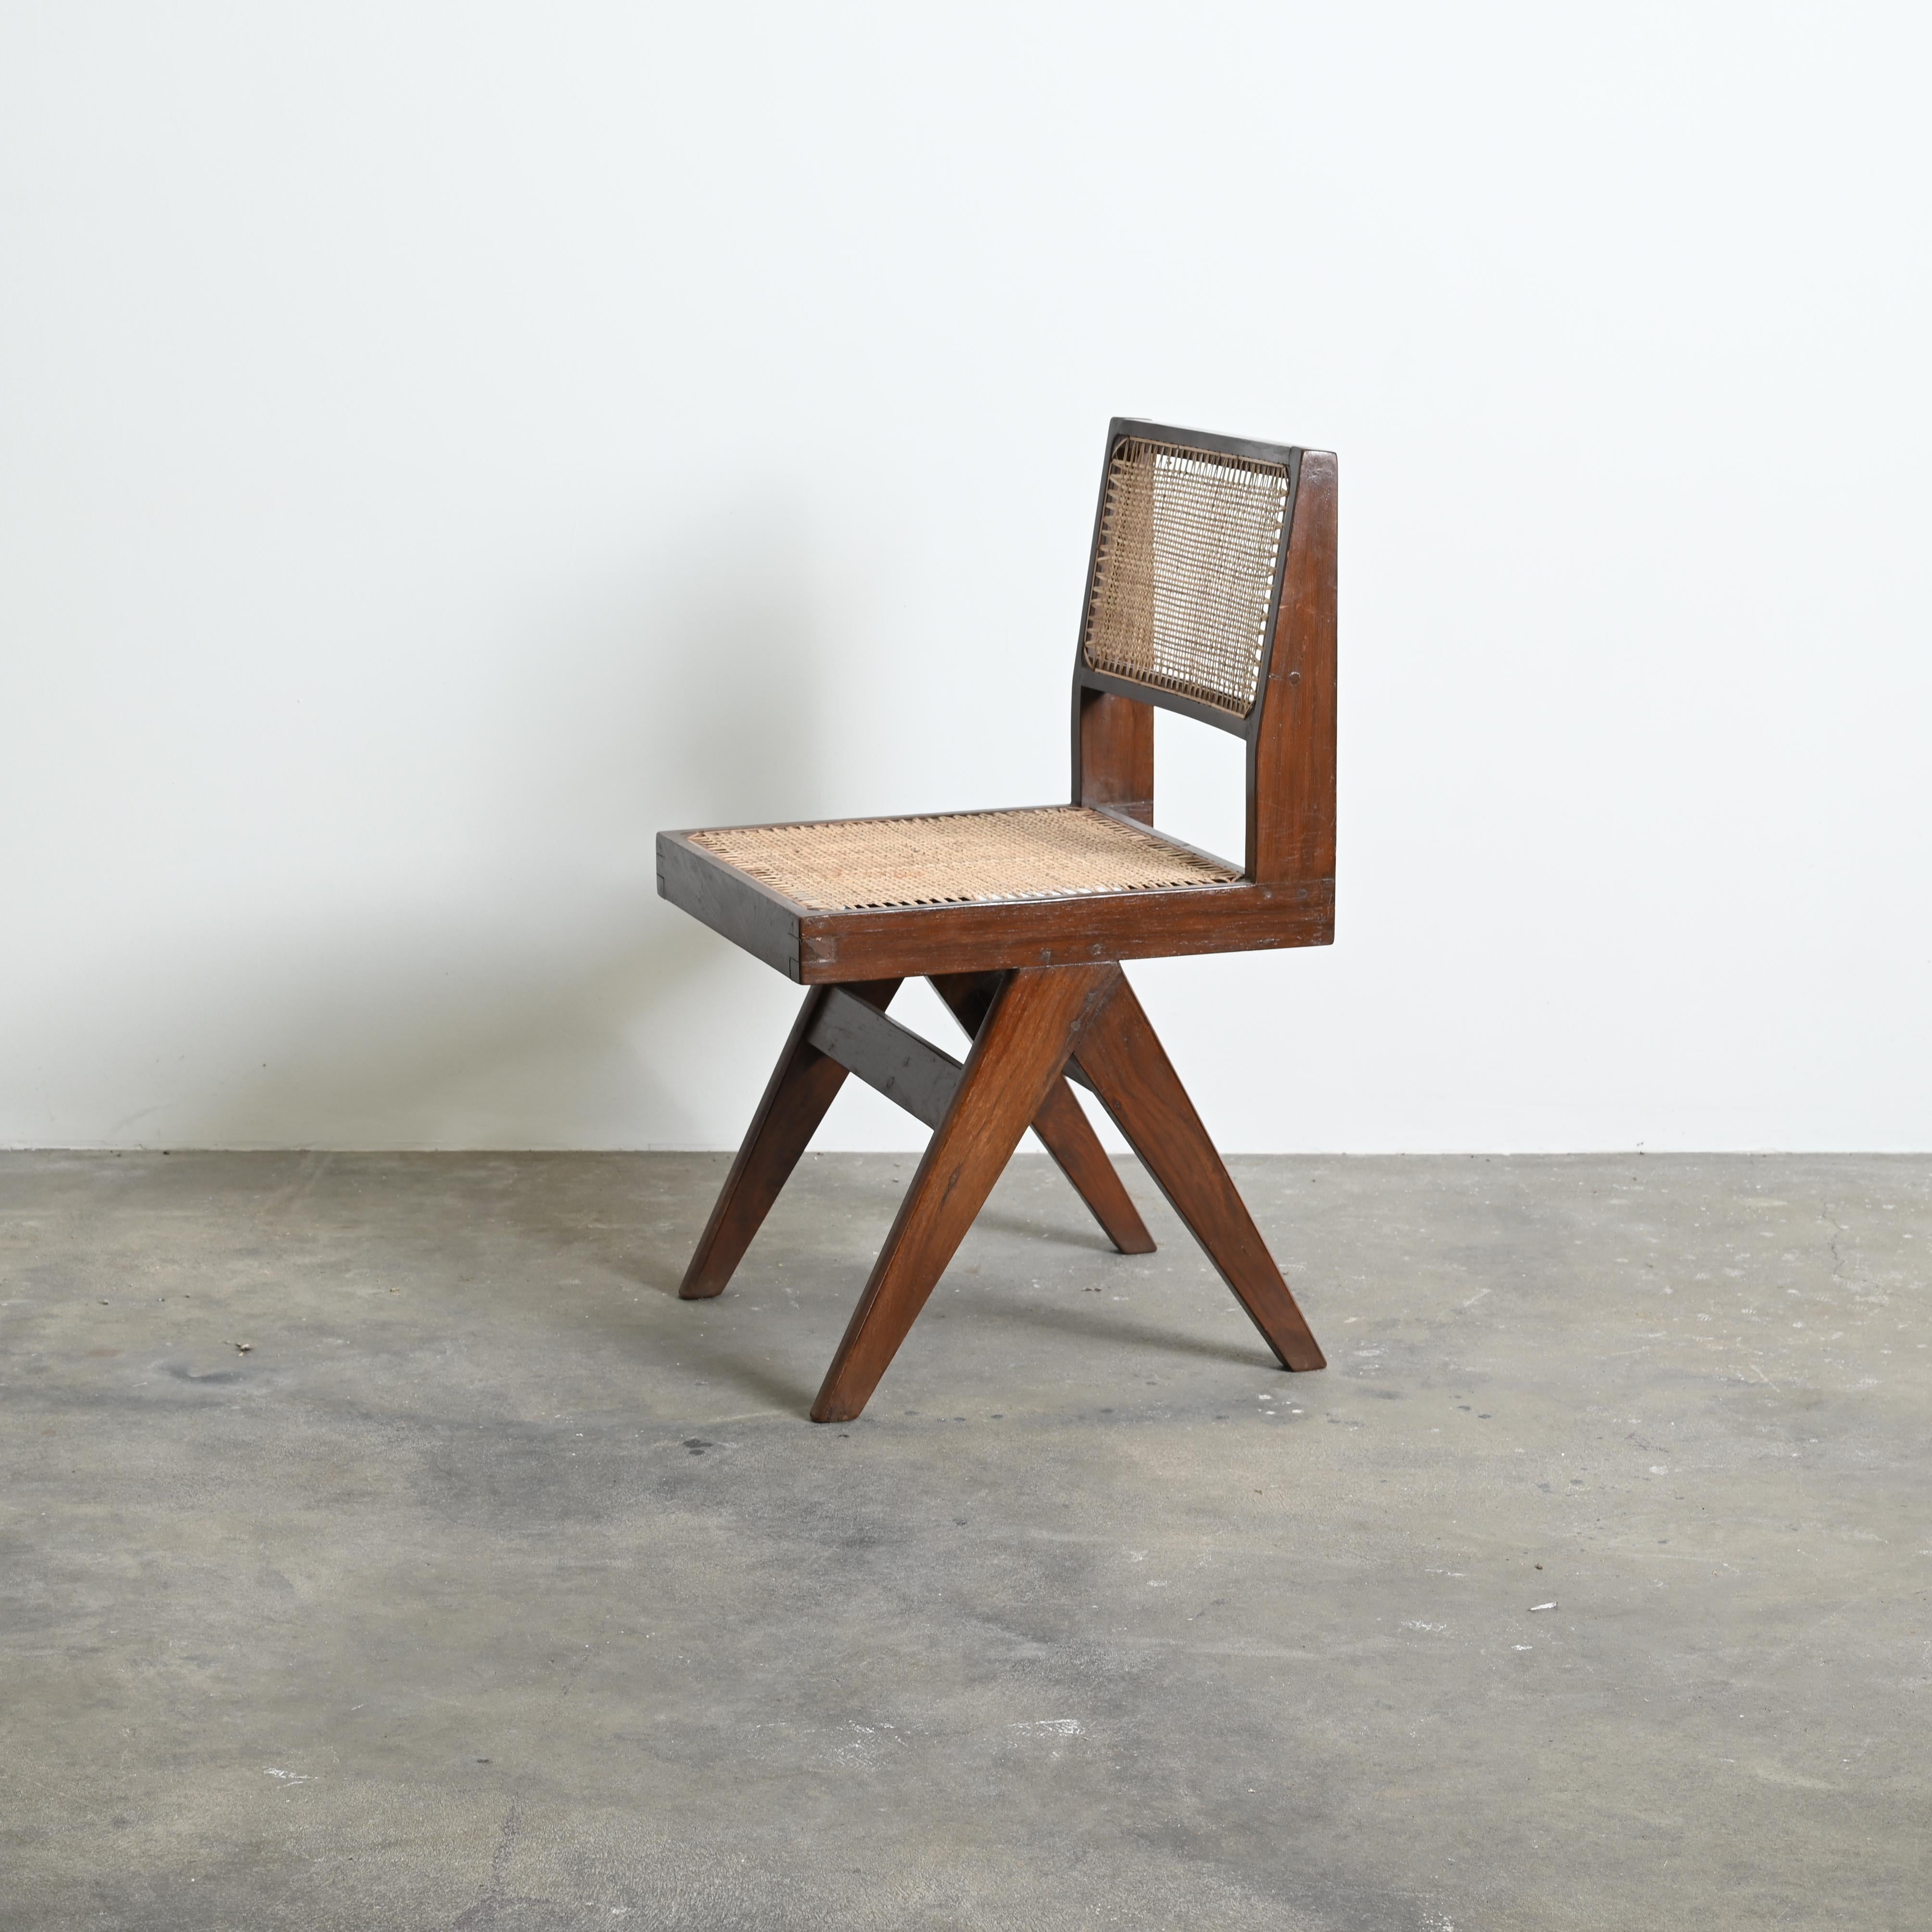 This pair of chairs are an iconic pieces. It appears so simple and still so precise, where proportions seems to be perfect. This A-shaped legs are typical for Chandigarh objects. Then this L-shaped seat, where the beams get at the ends thinner. It